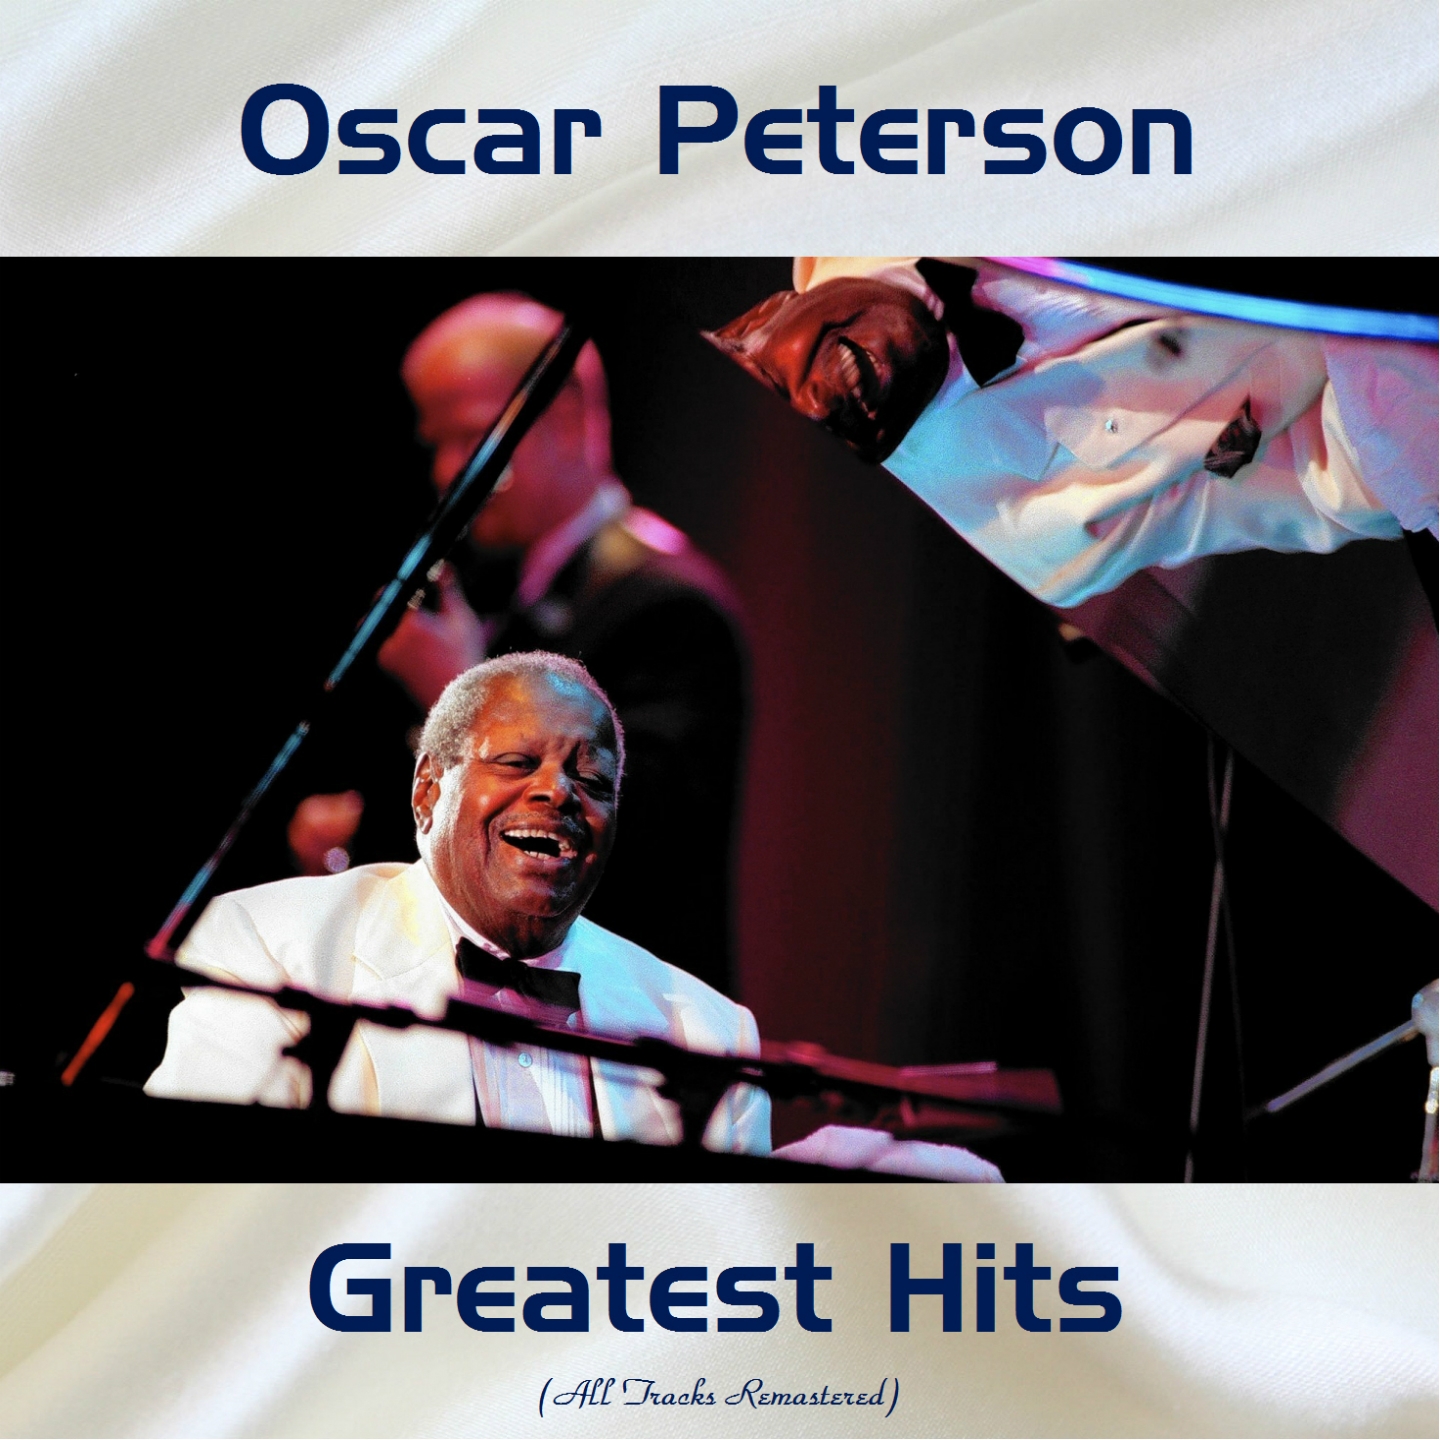 Oscar Peterson Greatest hits (All Tracks Remastered)